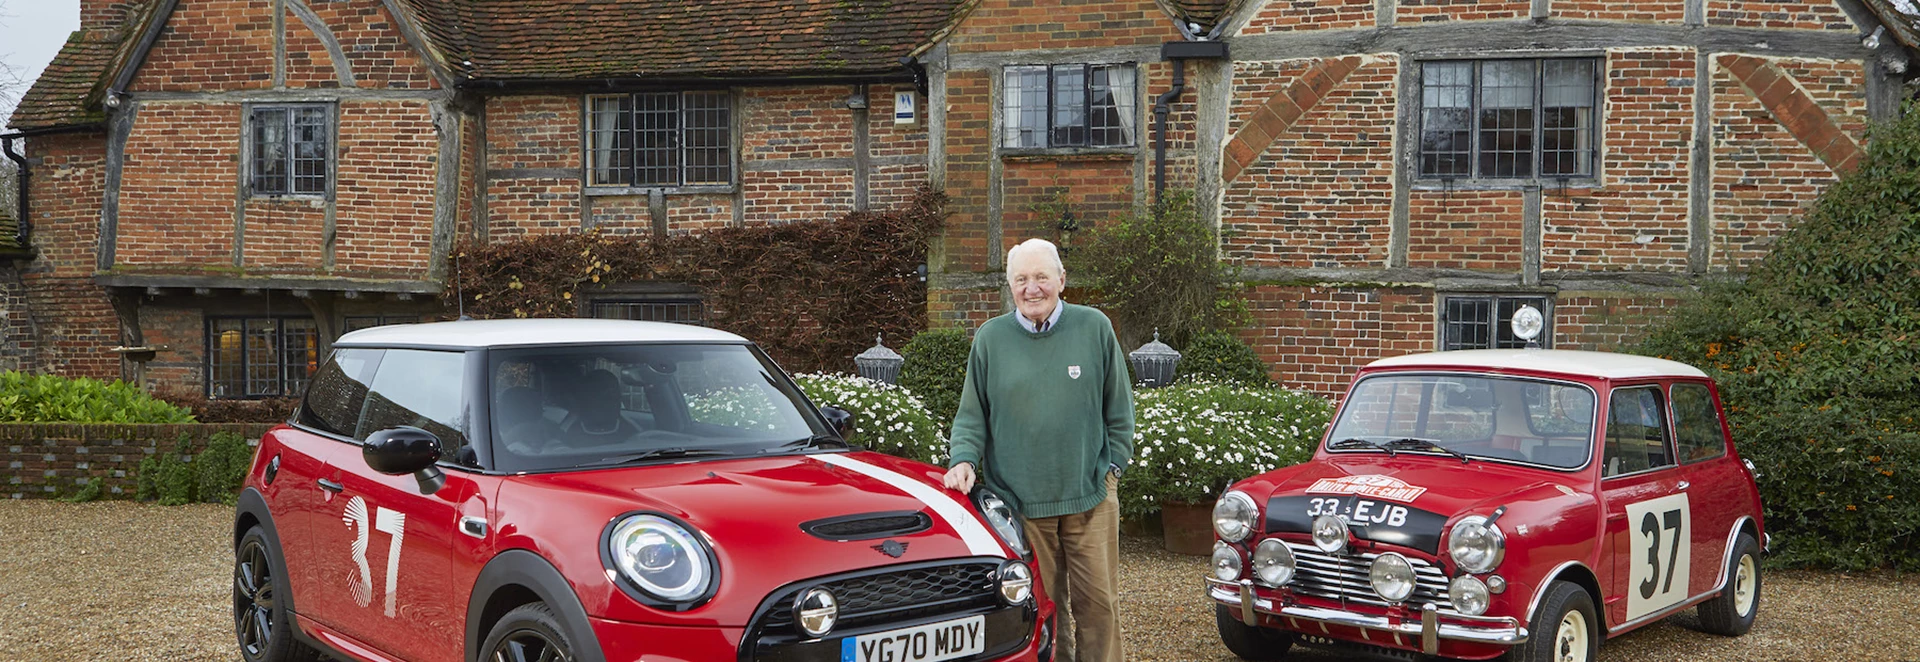 Rally legend takes delivery of special edition Mini named after him 